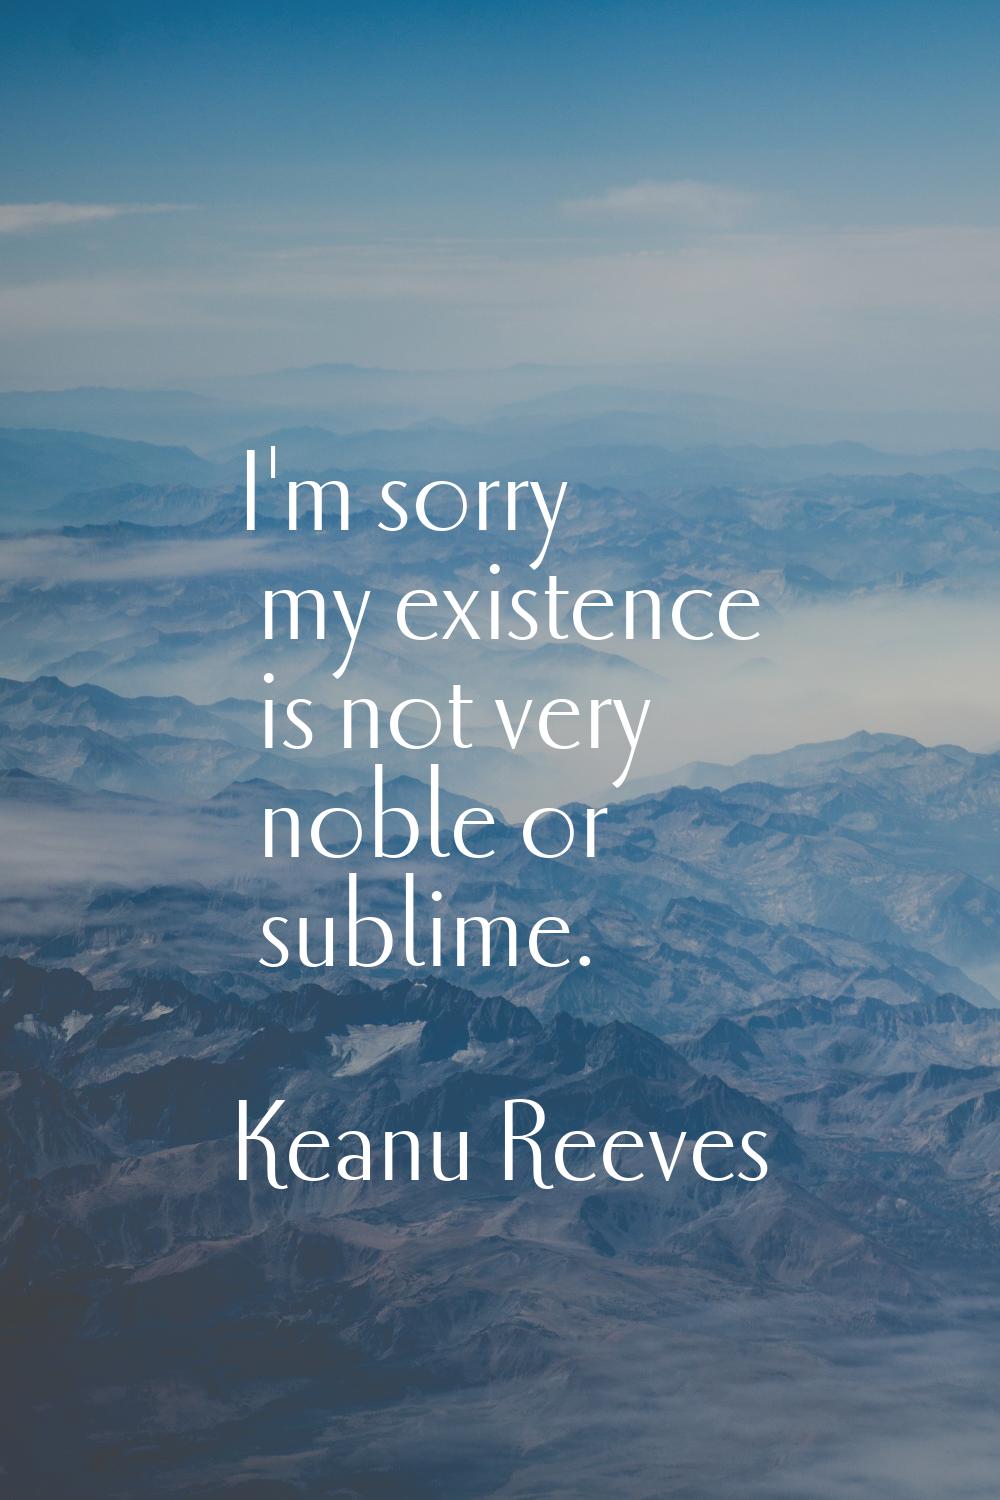 I'm sorry my existence is not very noble or sublime.